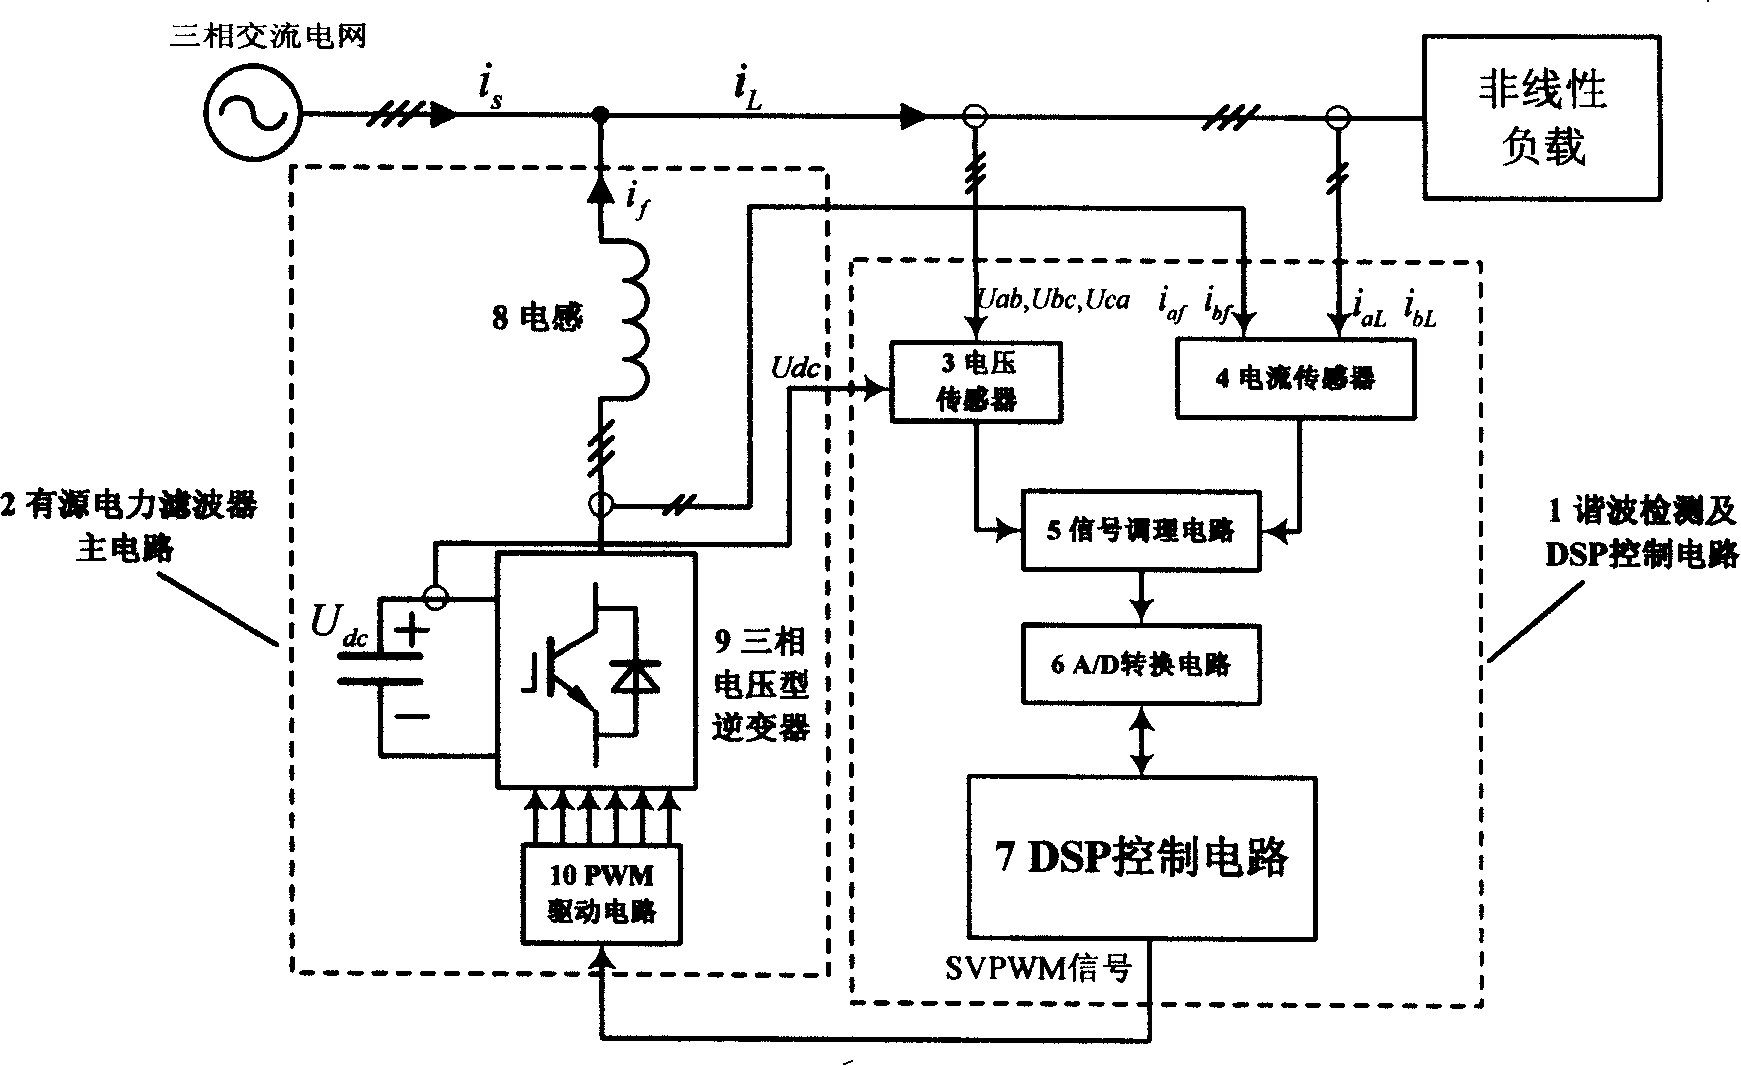 Method and system for delayed processing active electric power filter